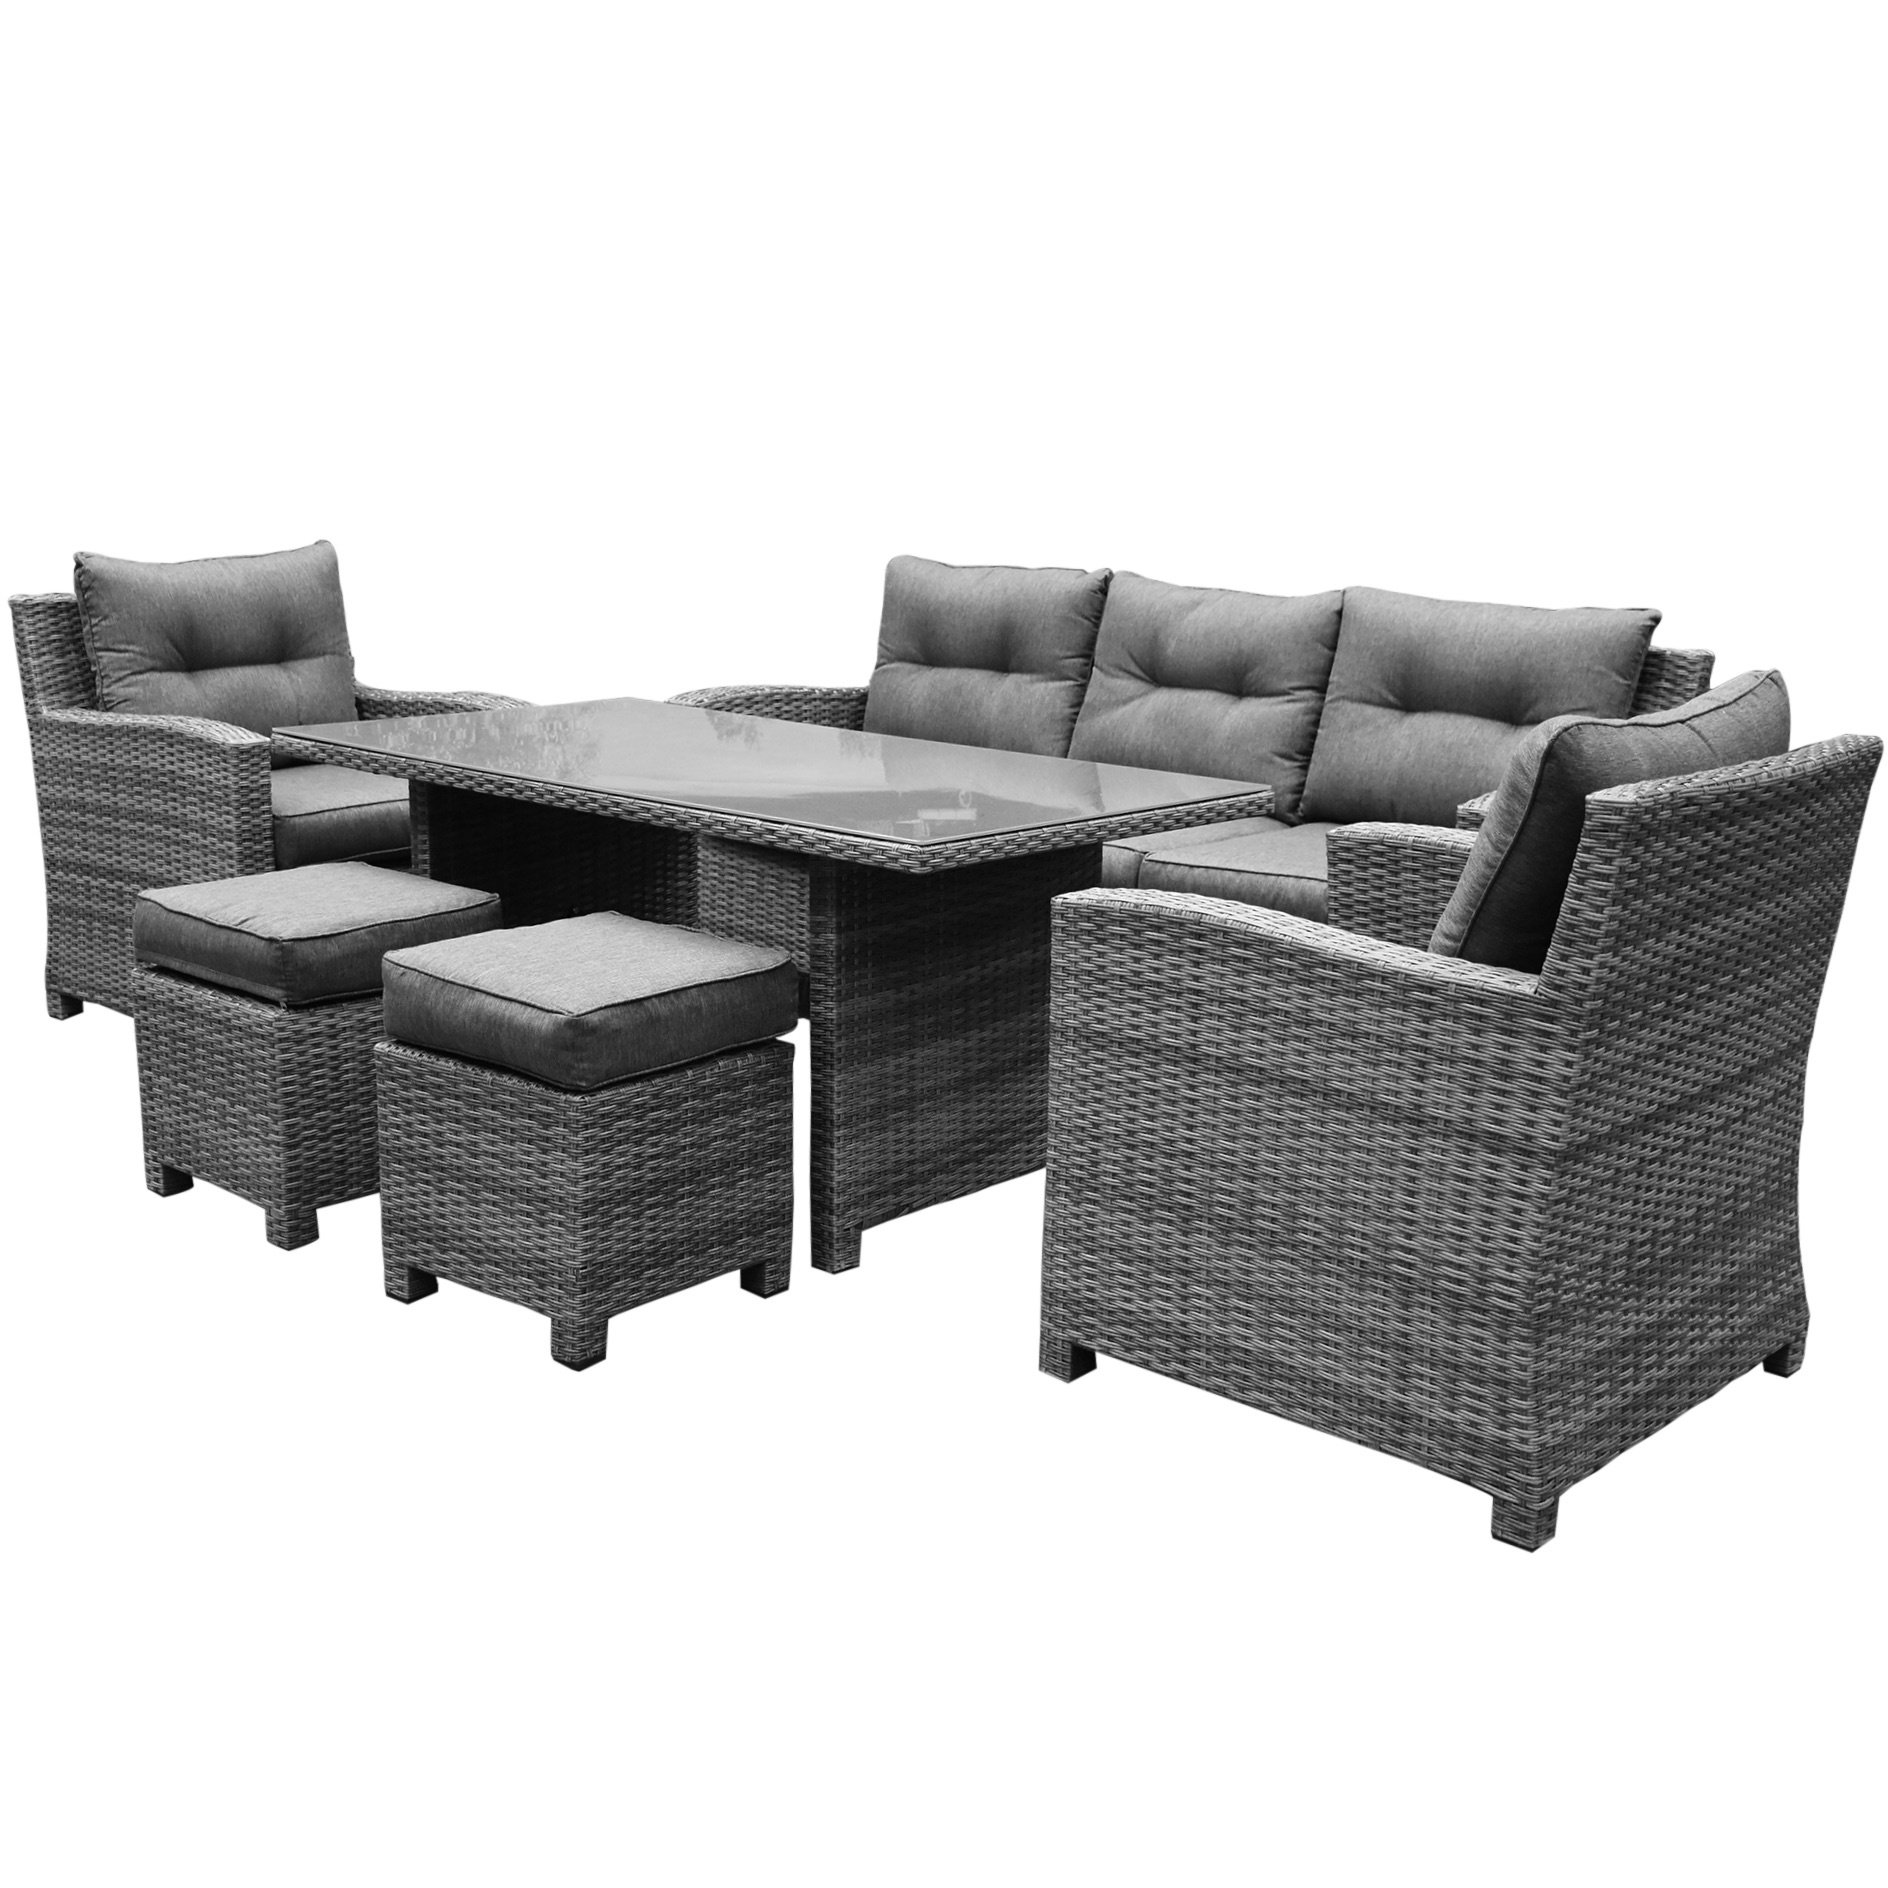 AVH-Collectie New Castle stoel-bank dining loungeset 6-delig  antraciet